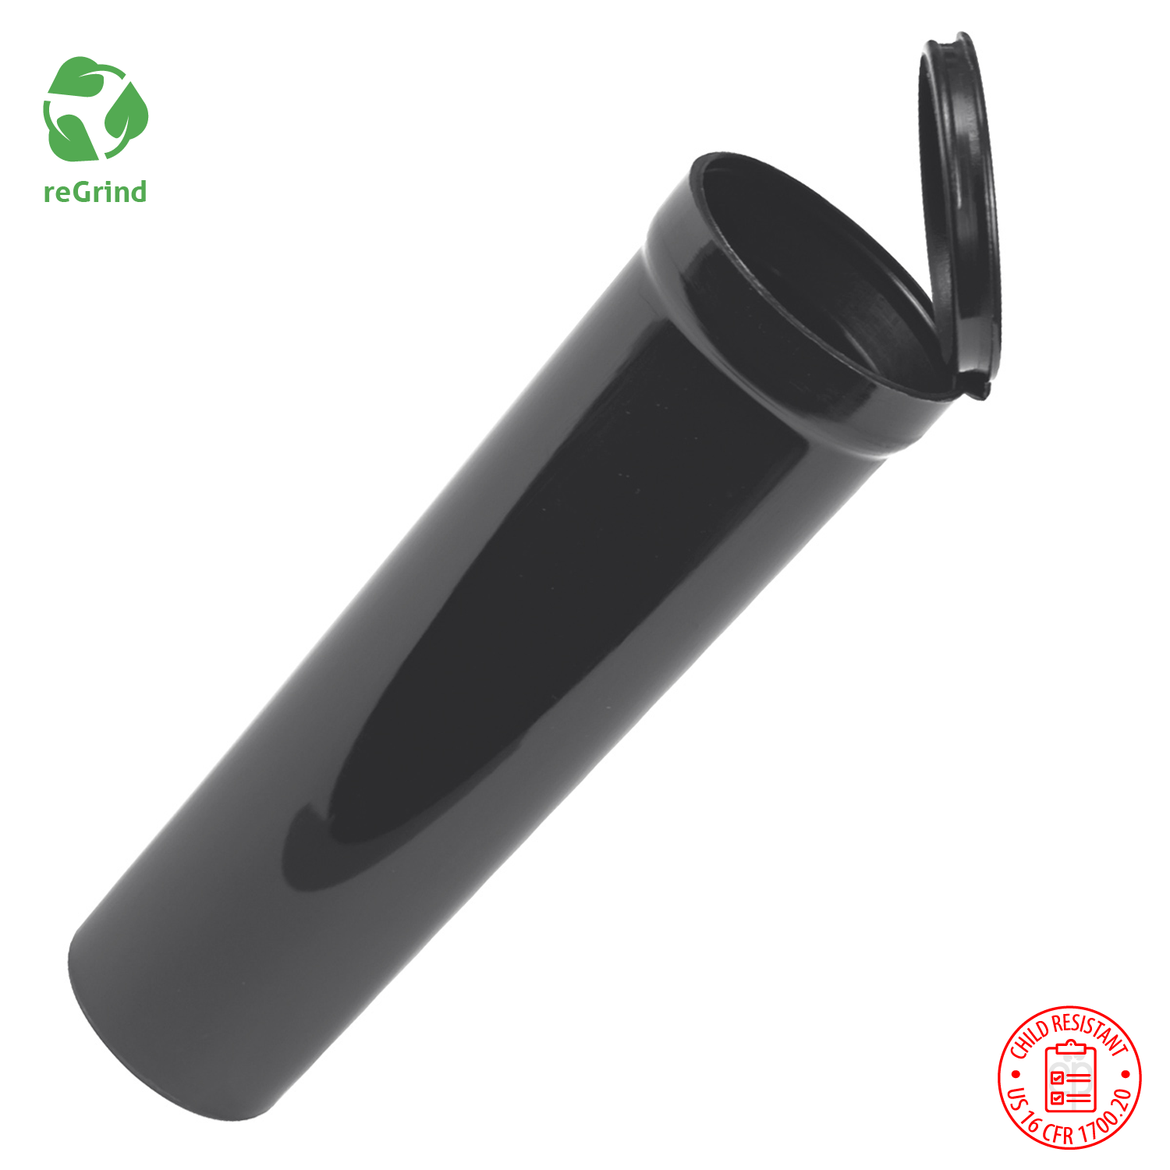 Recycled Plastic 98mm Wide Tapered Pre Roll Tubes - Child Resistant